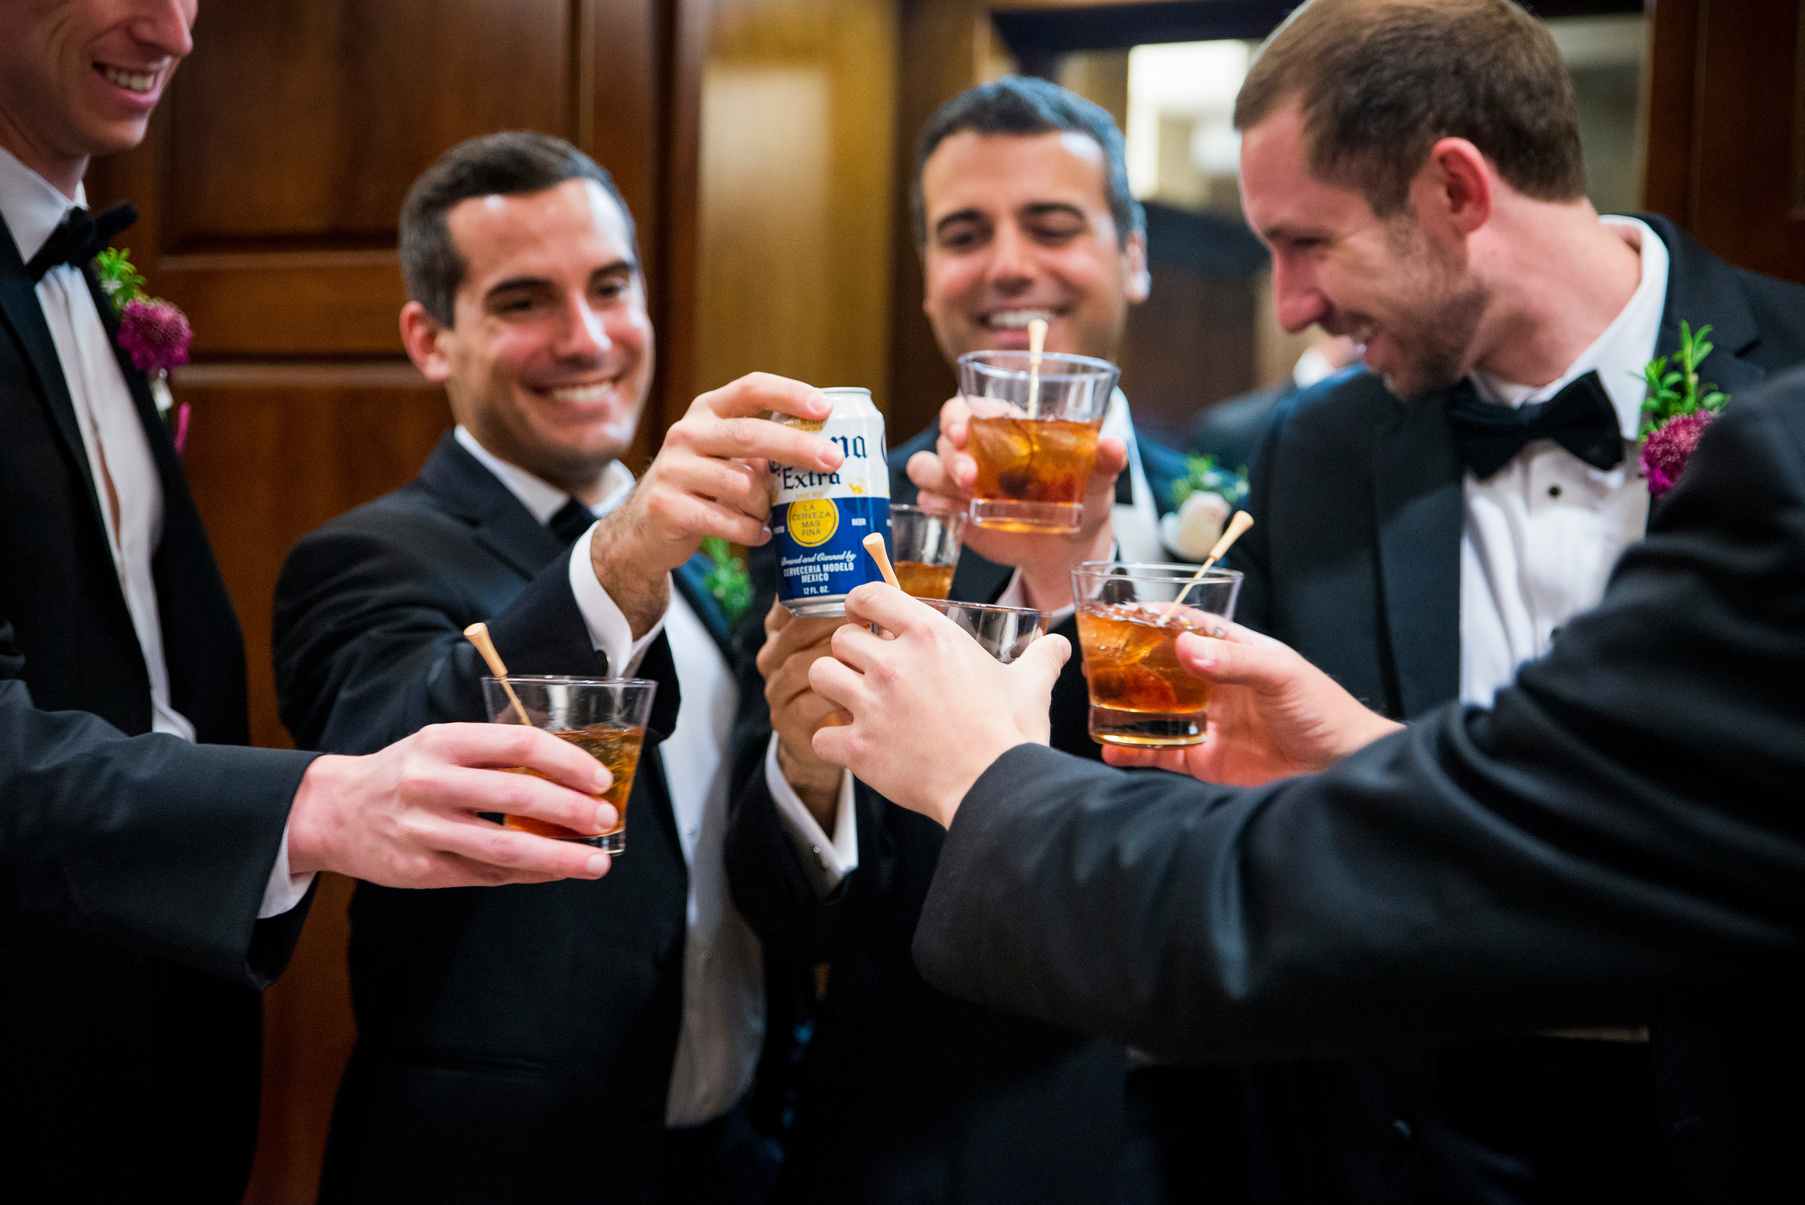 A group of groomsmen in tuxedos are toasting with beer and mixed drinks.